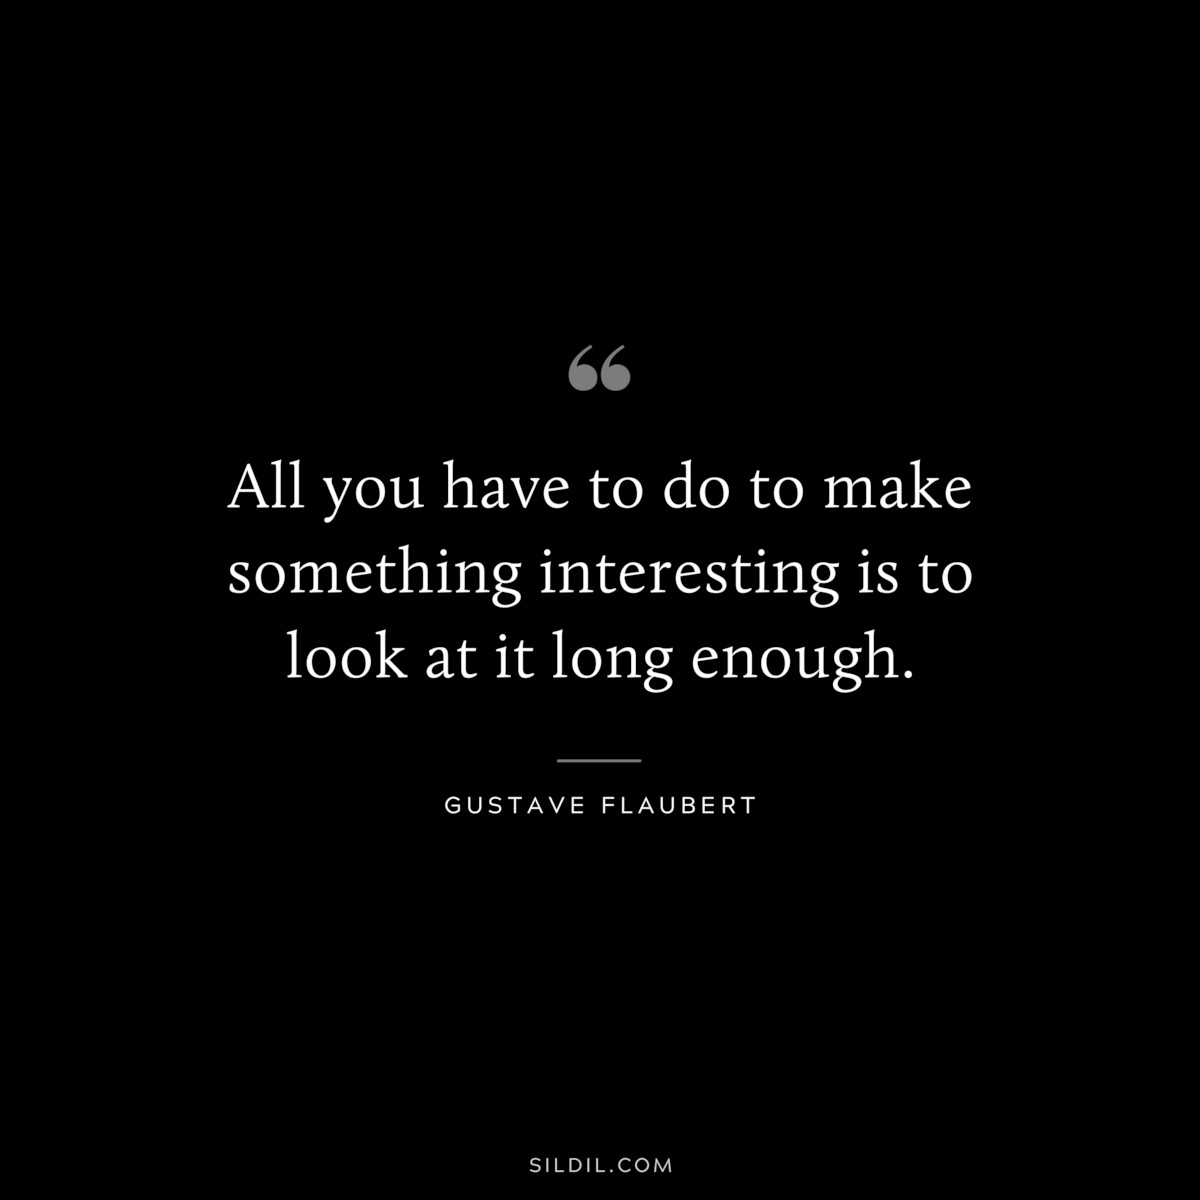 All you have to do to make something interesting is to look at it long enough. ― Gustave Flaubert